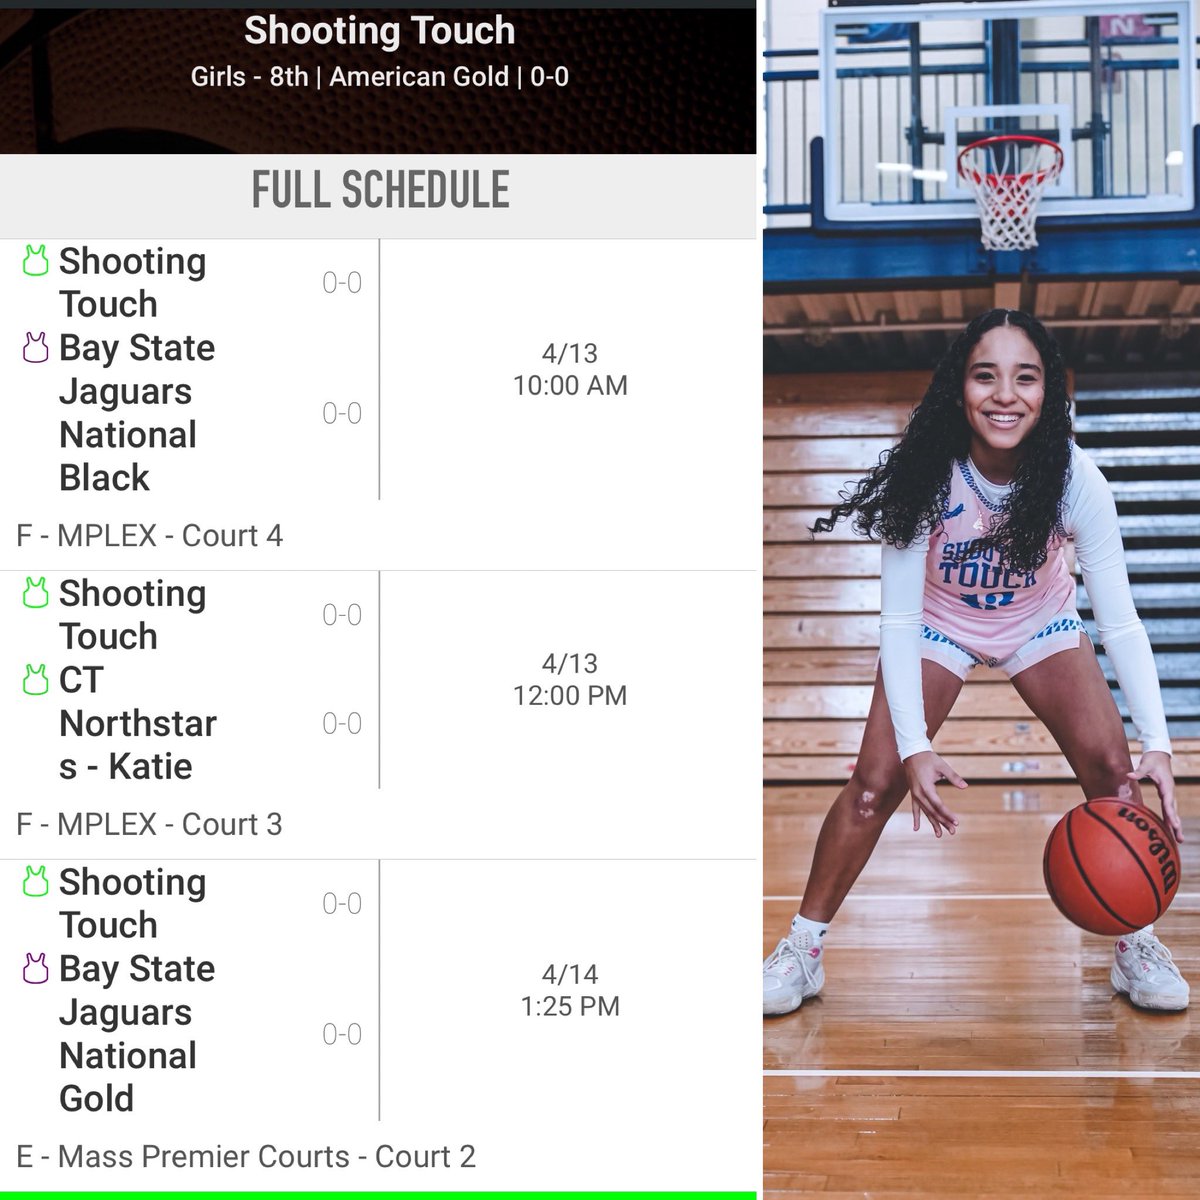 @JrAllStarBB Come by to see @V13Resto and her @ShootingTouchMA team @zg_newengland NERR Hoop/Queen of Boston tourney